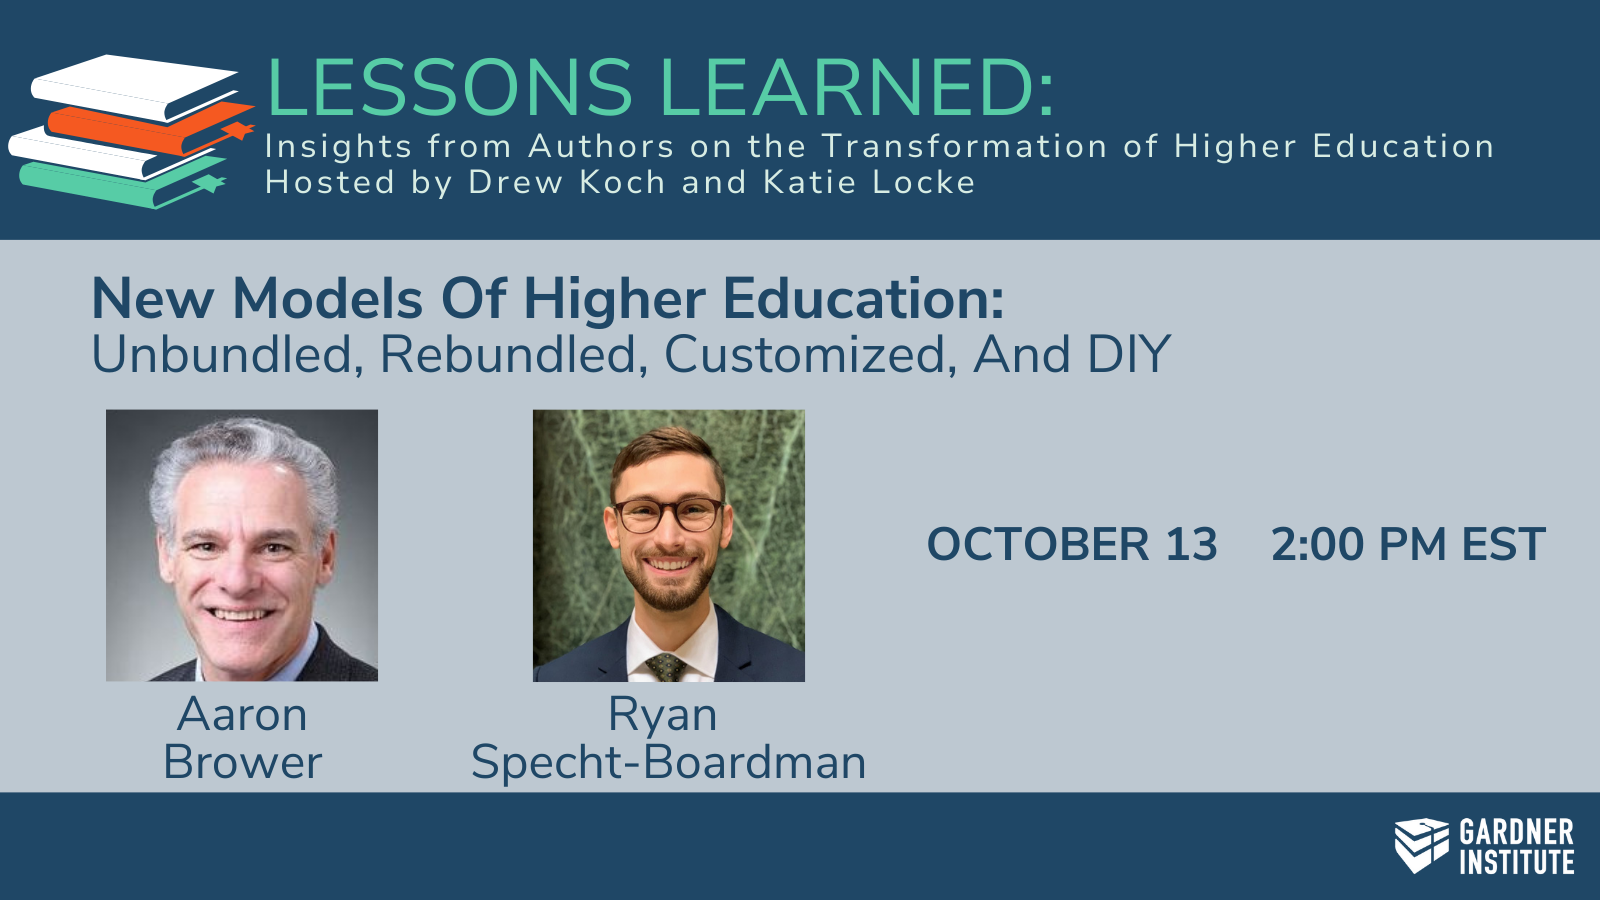 Lessons Learned with Aaron Brower and Ryan Specht-Boardman authors of New Models of Higher Education. October 13 at 2pm eastern